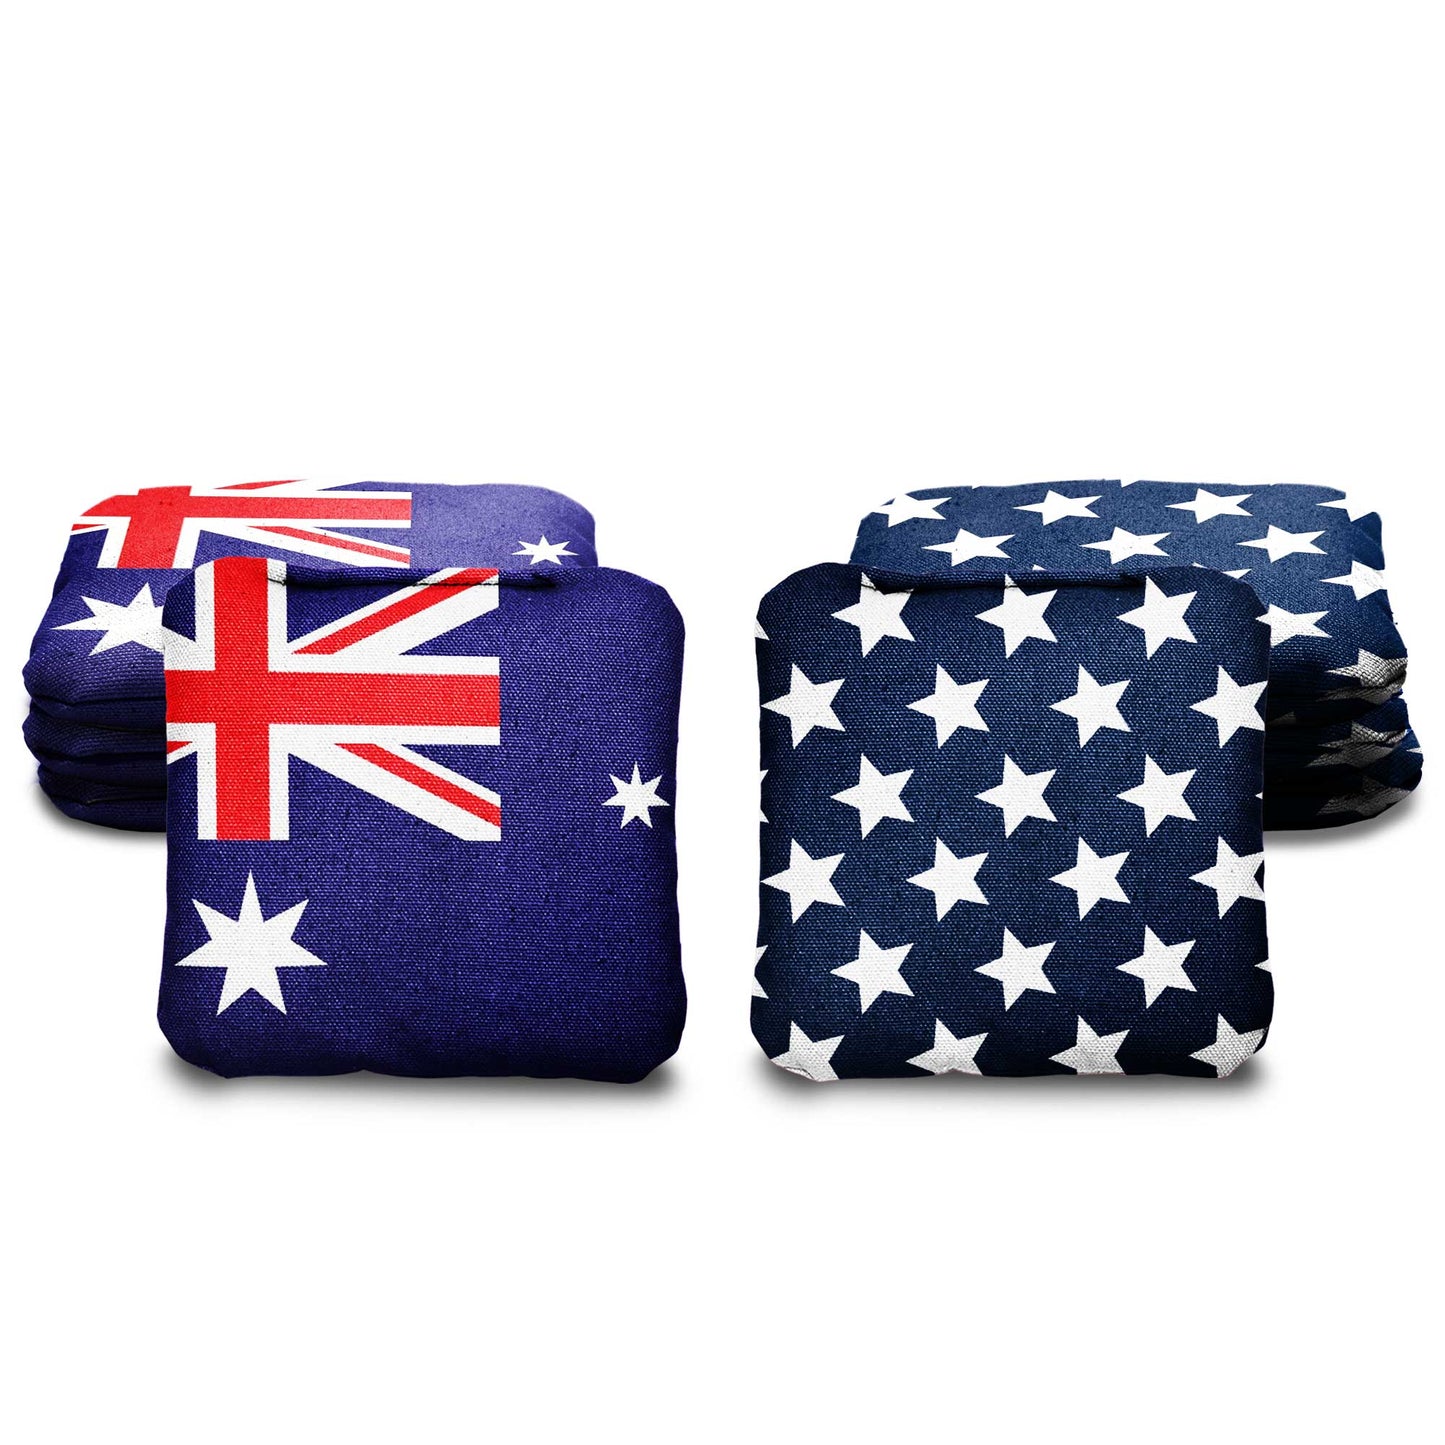 The Aussies and Mericas - 8 Cornhole Bags